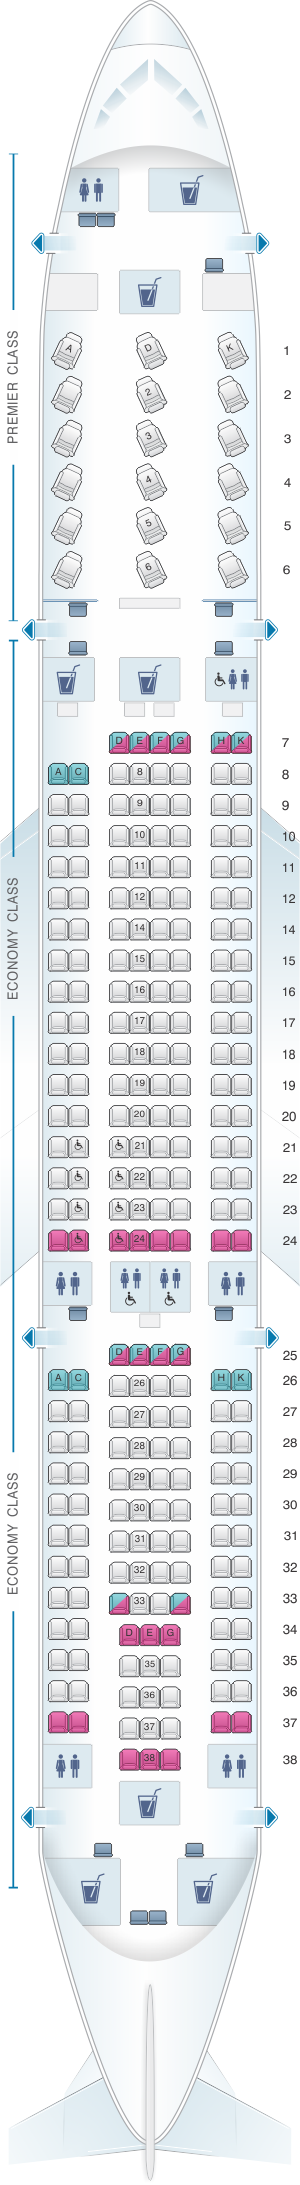 Seat map for Jet Airways Airbus A330 200 254PAX